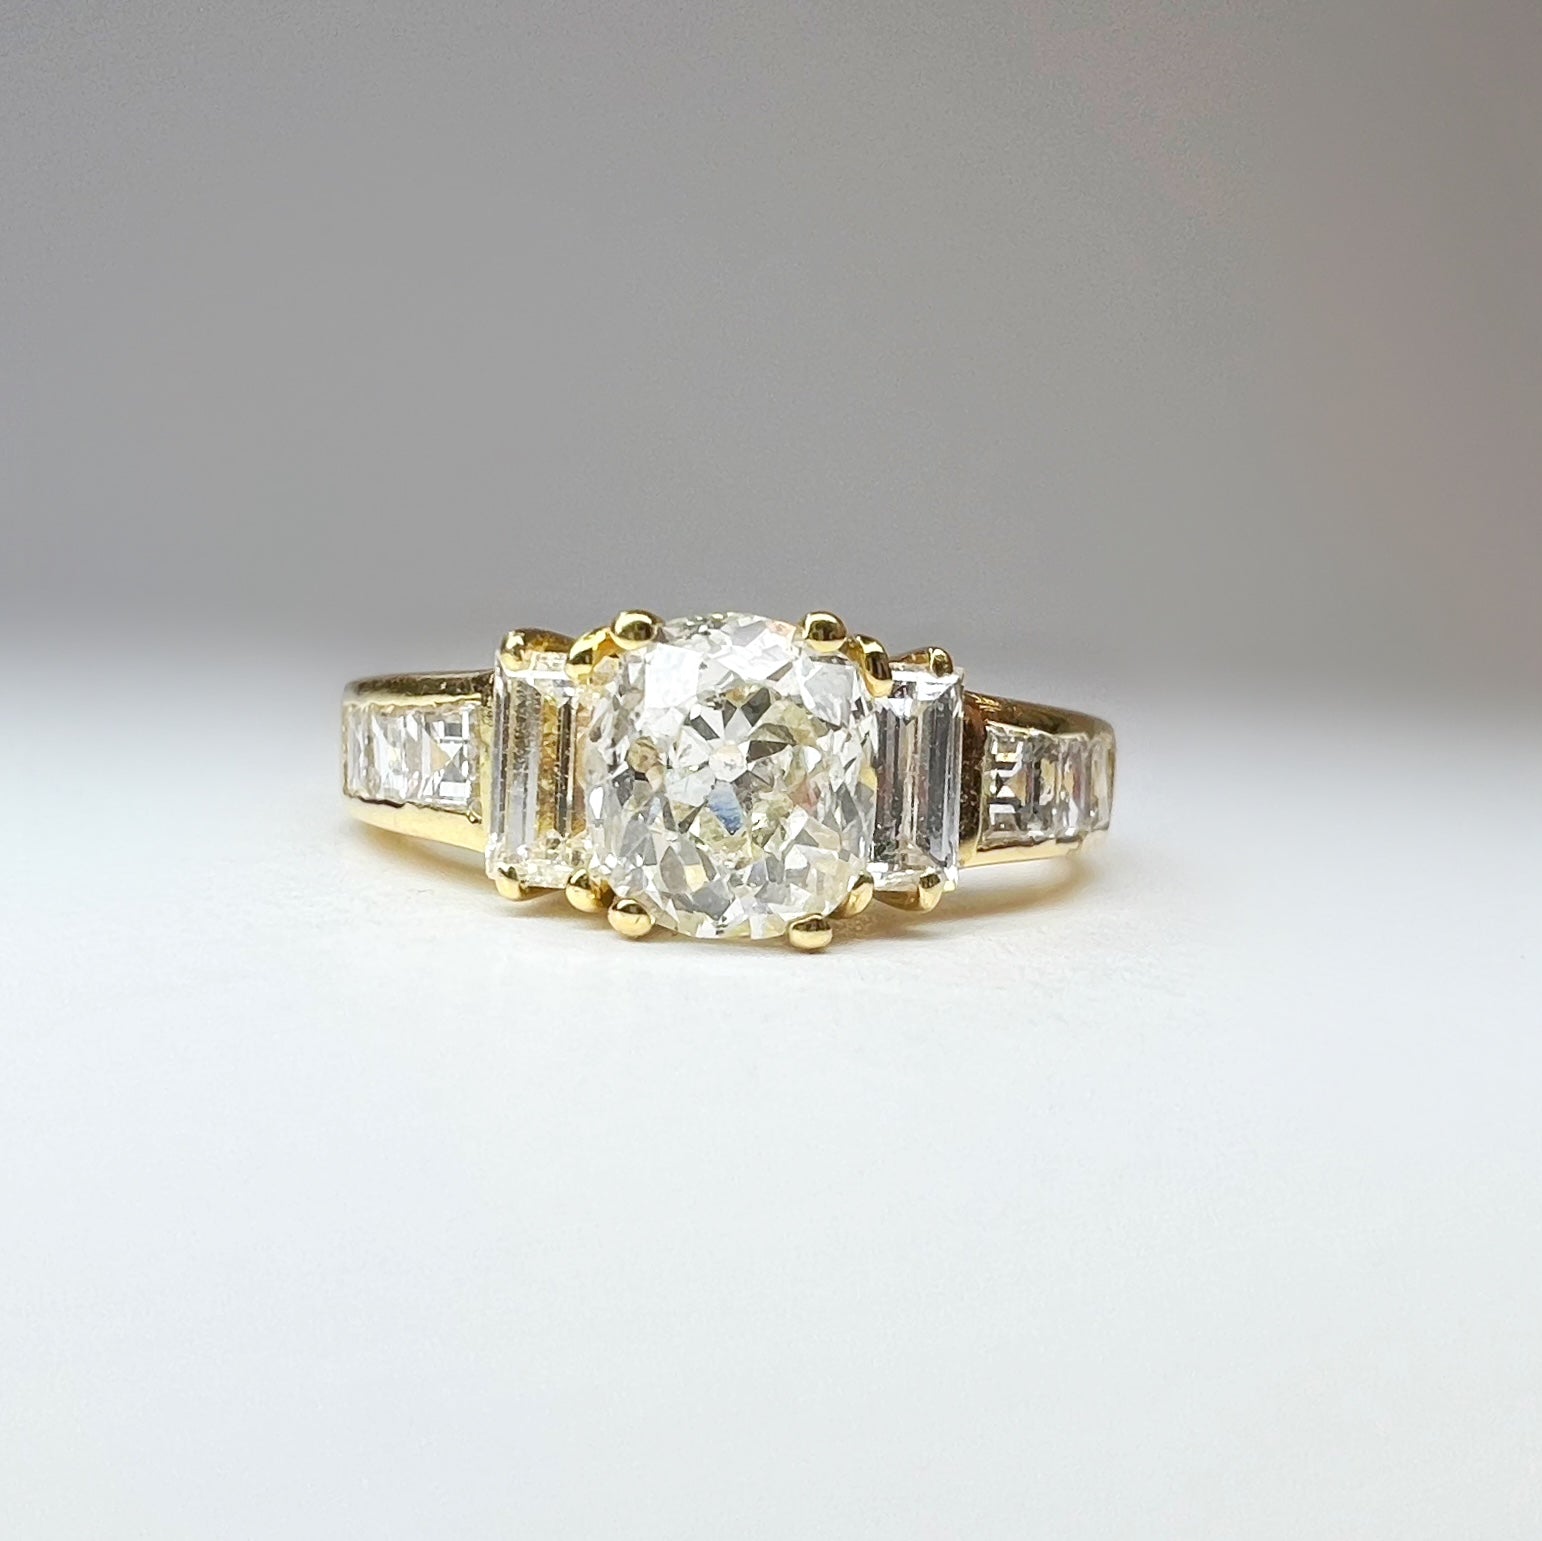 1.92ct Old Cut Diamond Ring with Diamond Baguette Shoulders